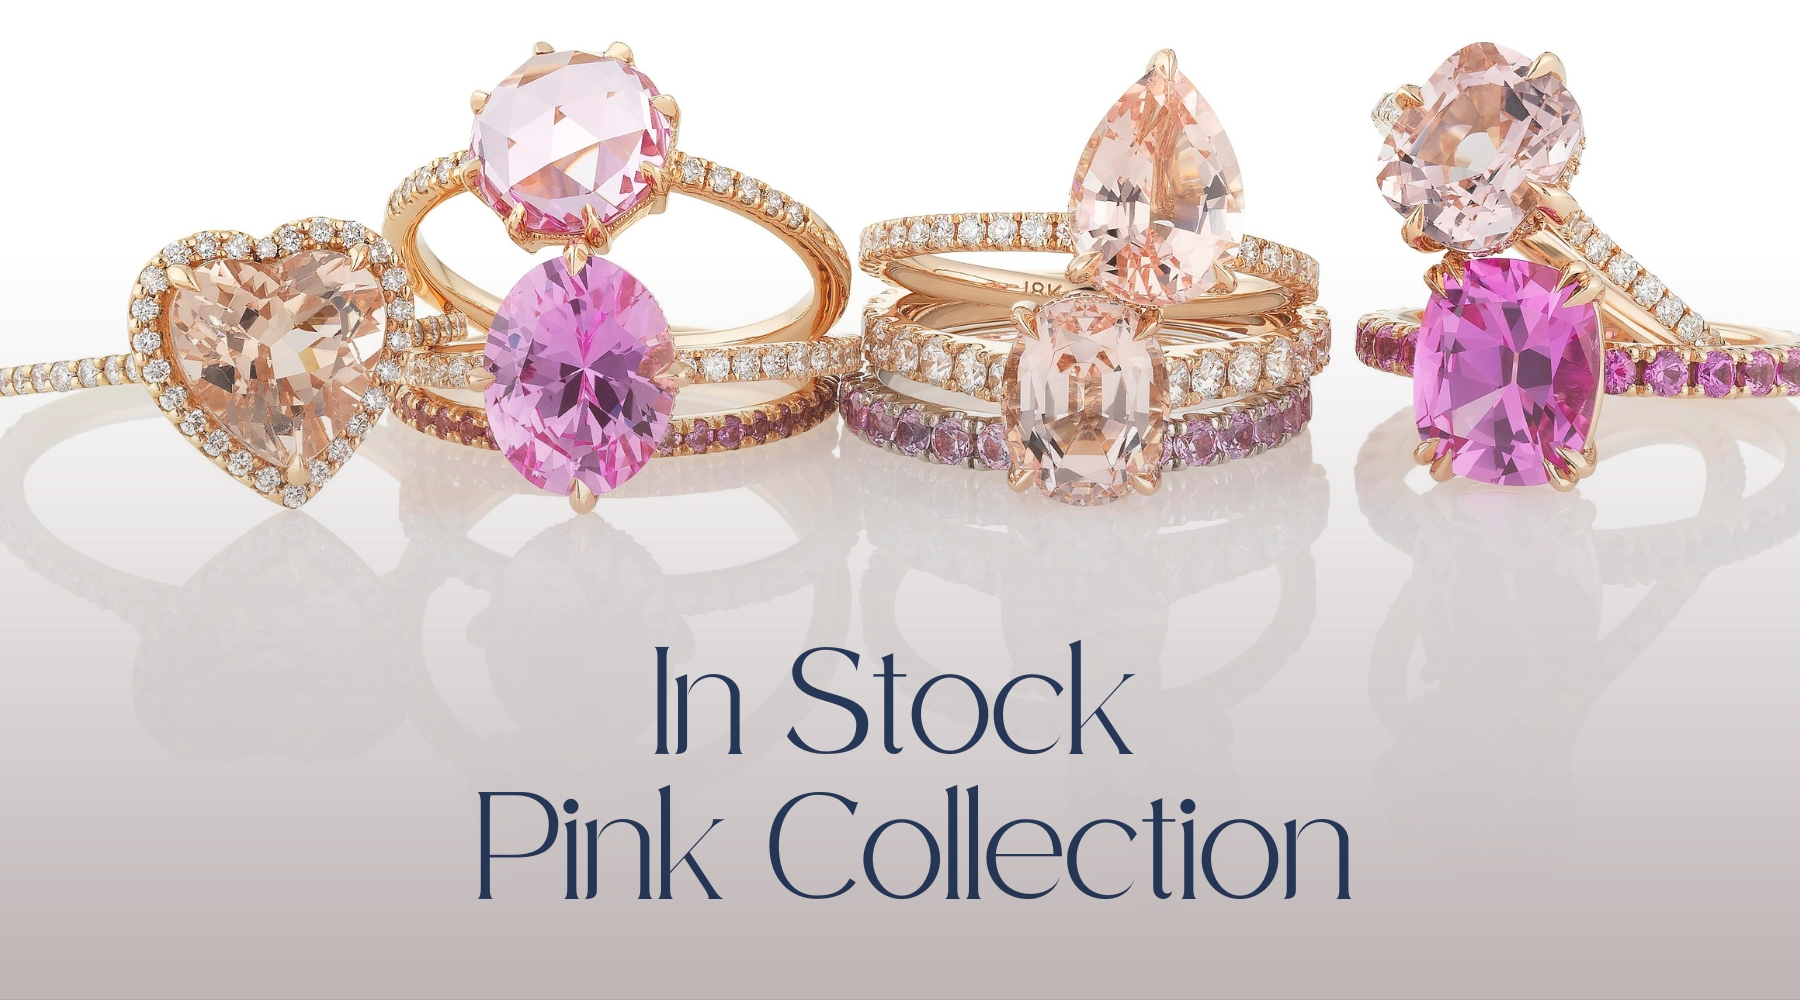 In Stock Pink Collection